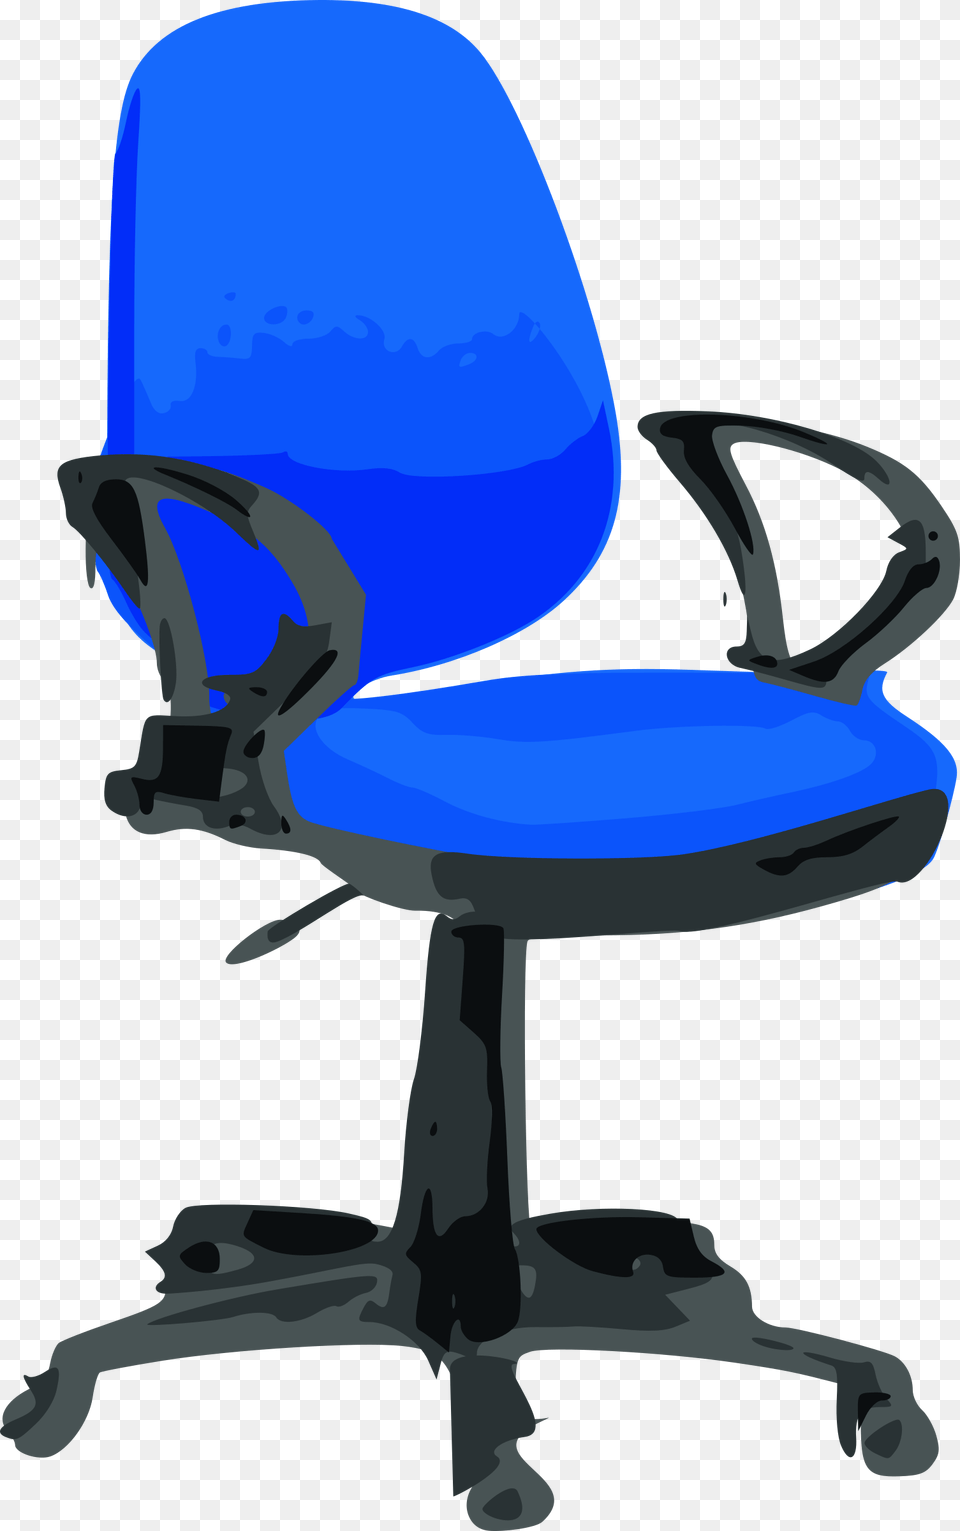 This Icons Design Of Desk Chair Blue With, Cushion, Furniture, Home Decor, Animal Free Png Download